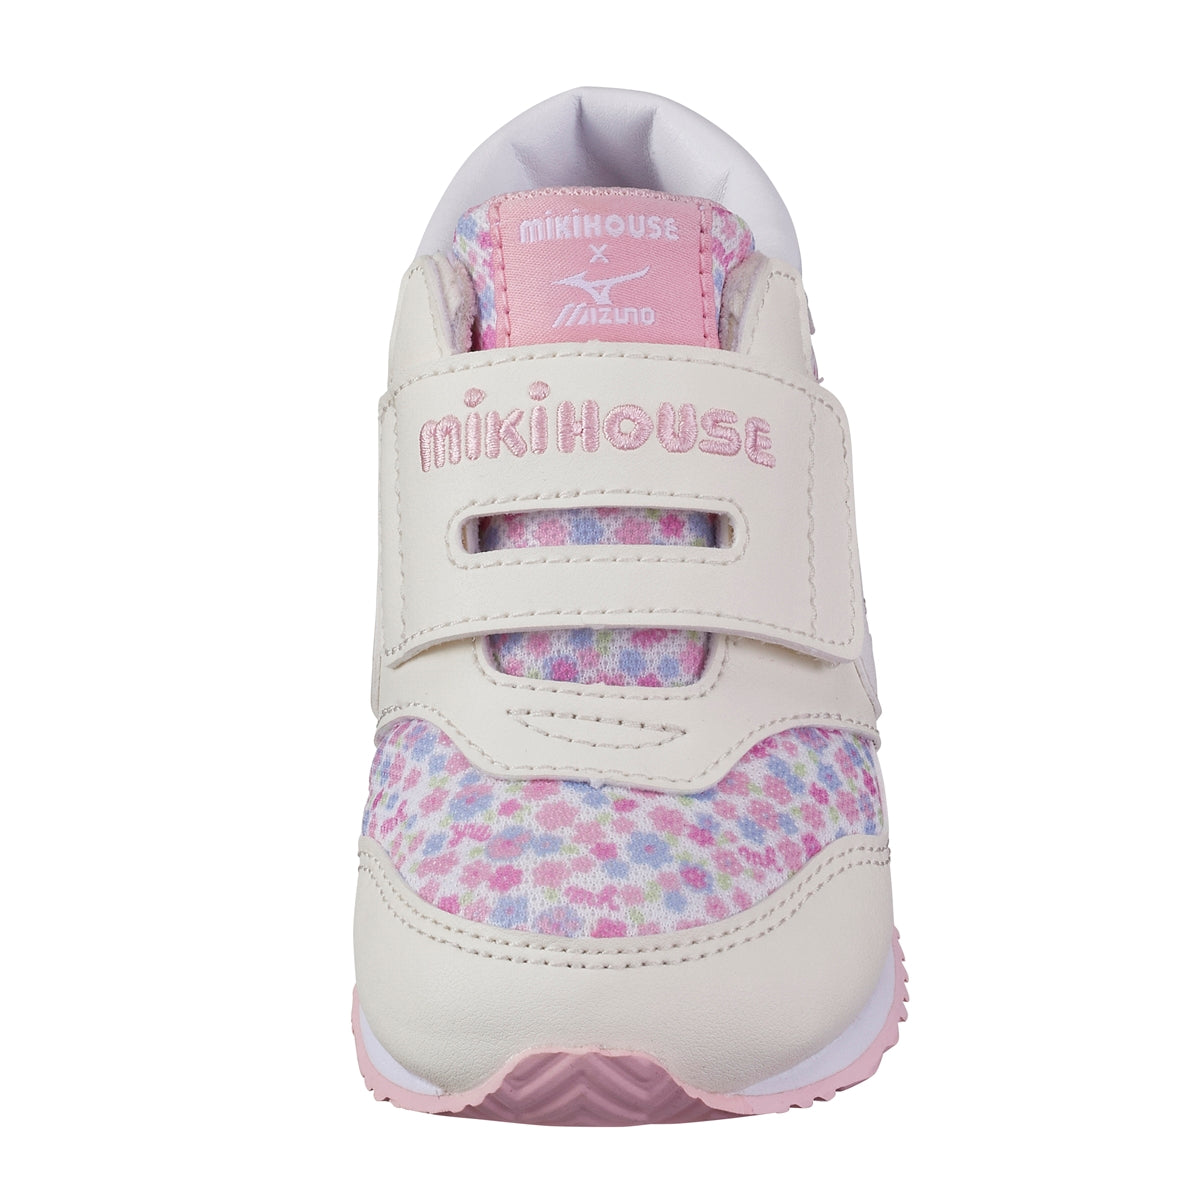 MIKI HOUSE & Mizuno Second Shoes - Floral